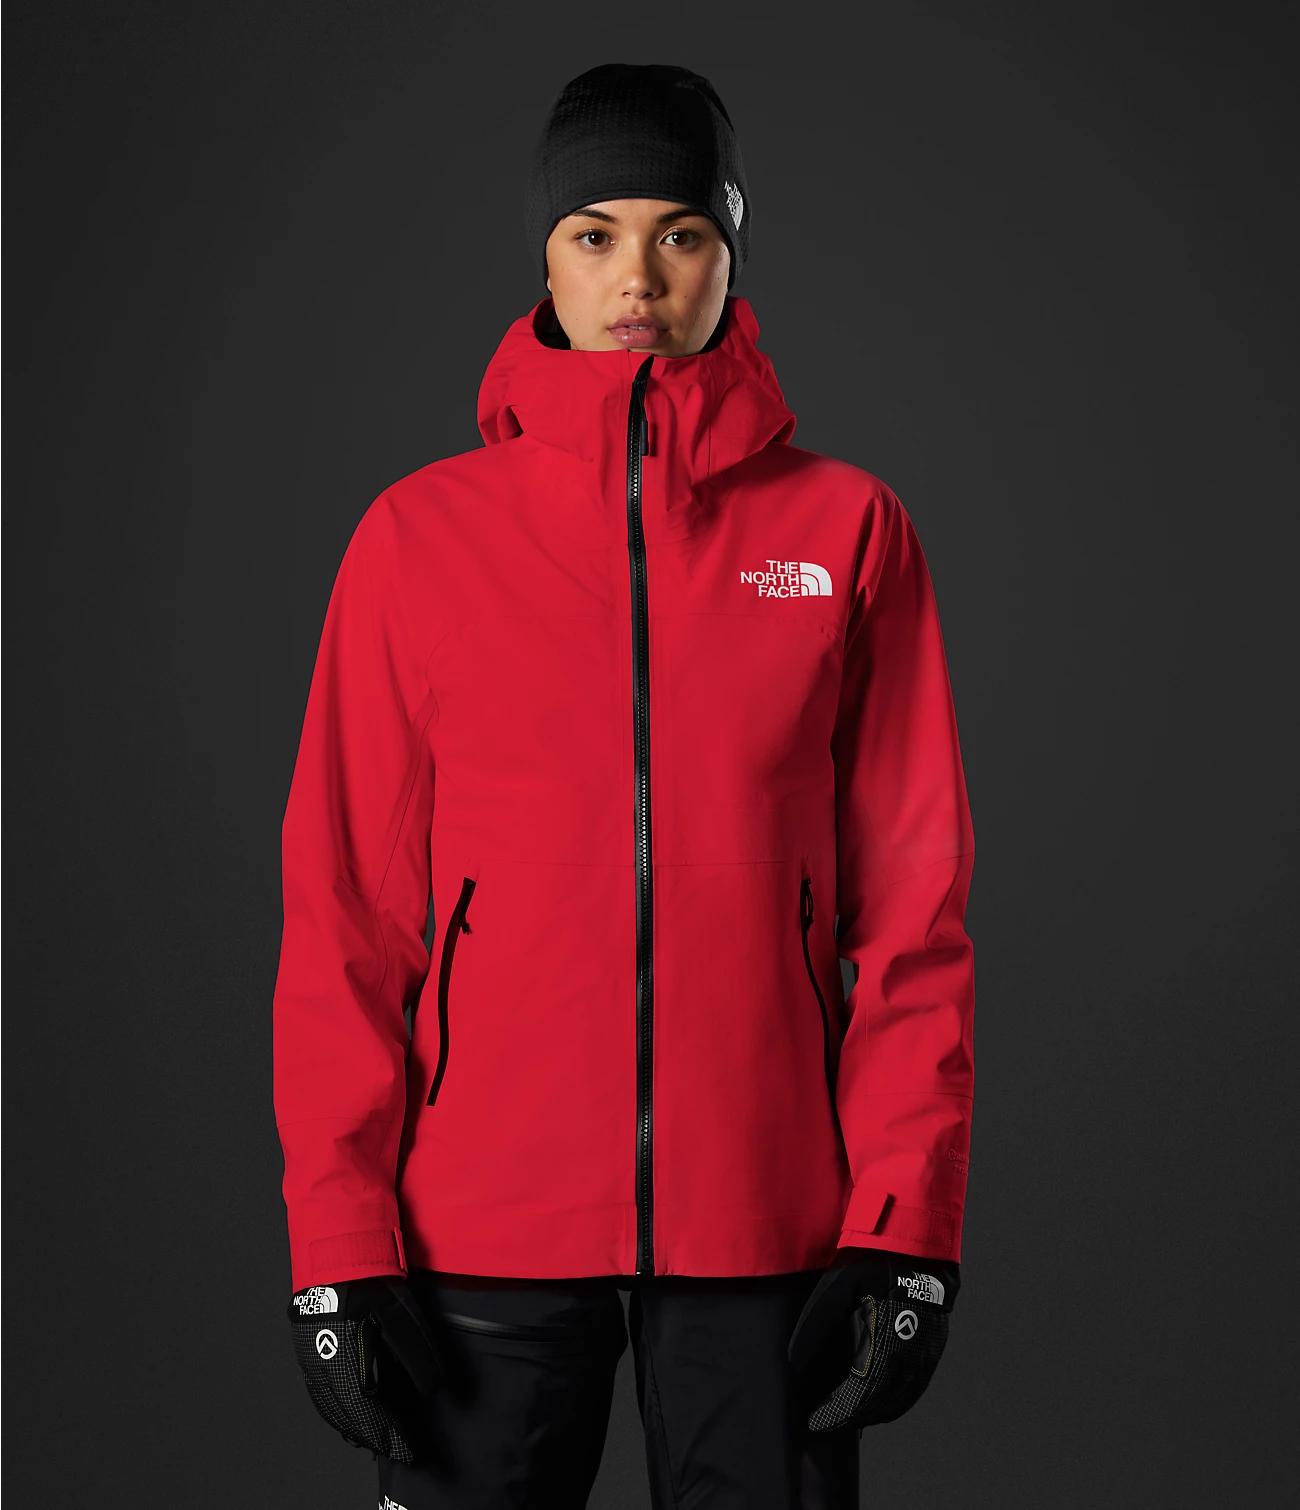 Women’s Summit Series Chamlang FUTURELIGHT™ Jacket by THE NORTH FACE